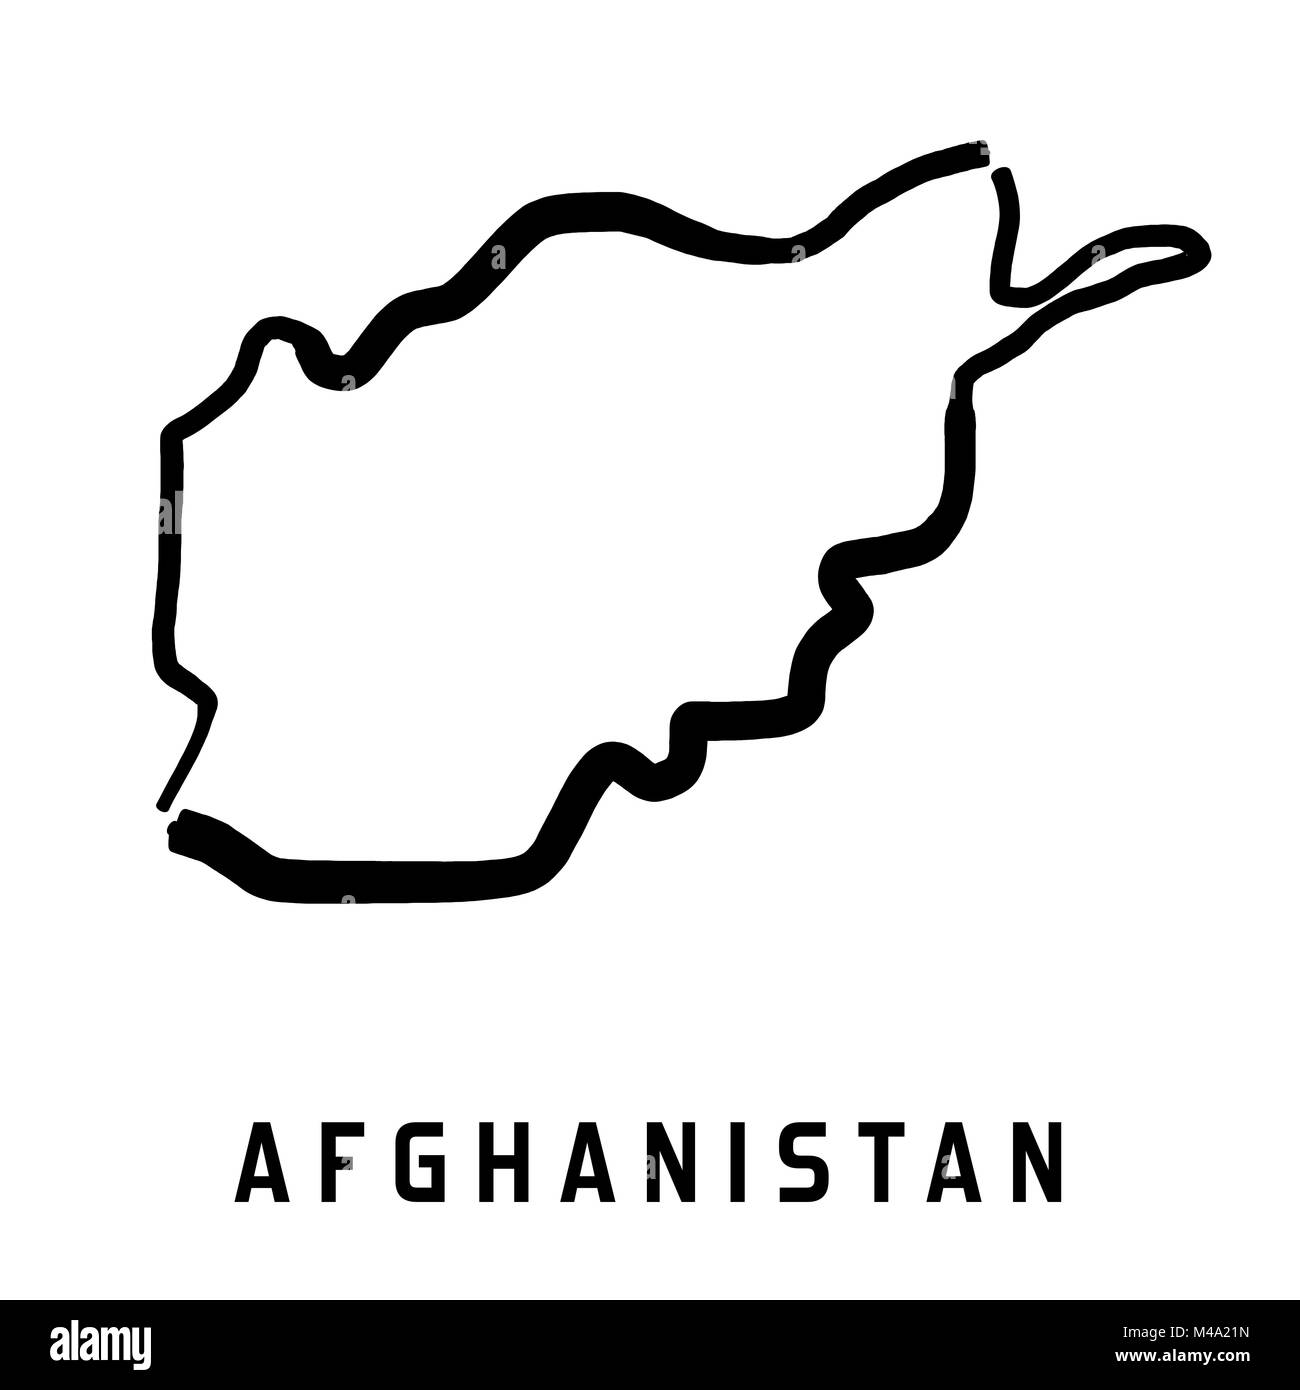 Afghanistan simple map outline - smooth simplified country shape map vector. Stock Vector